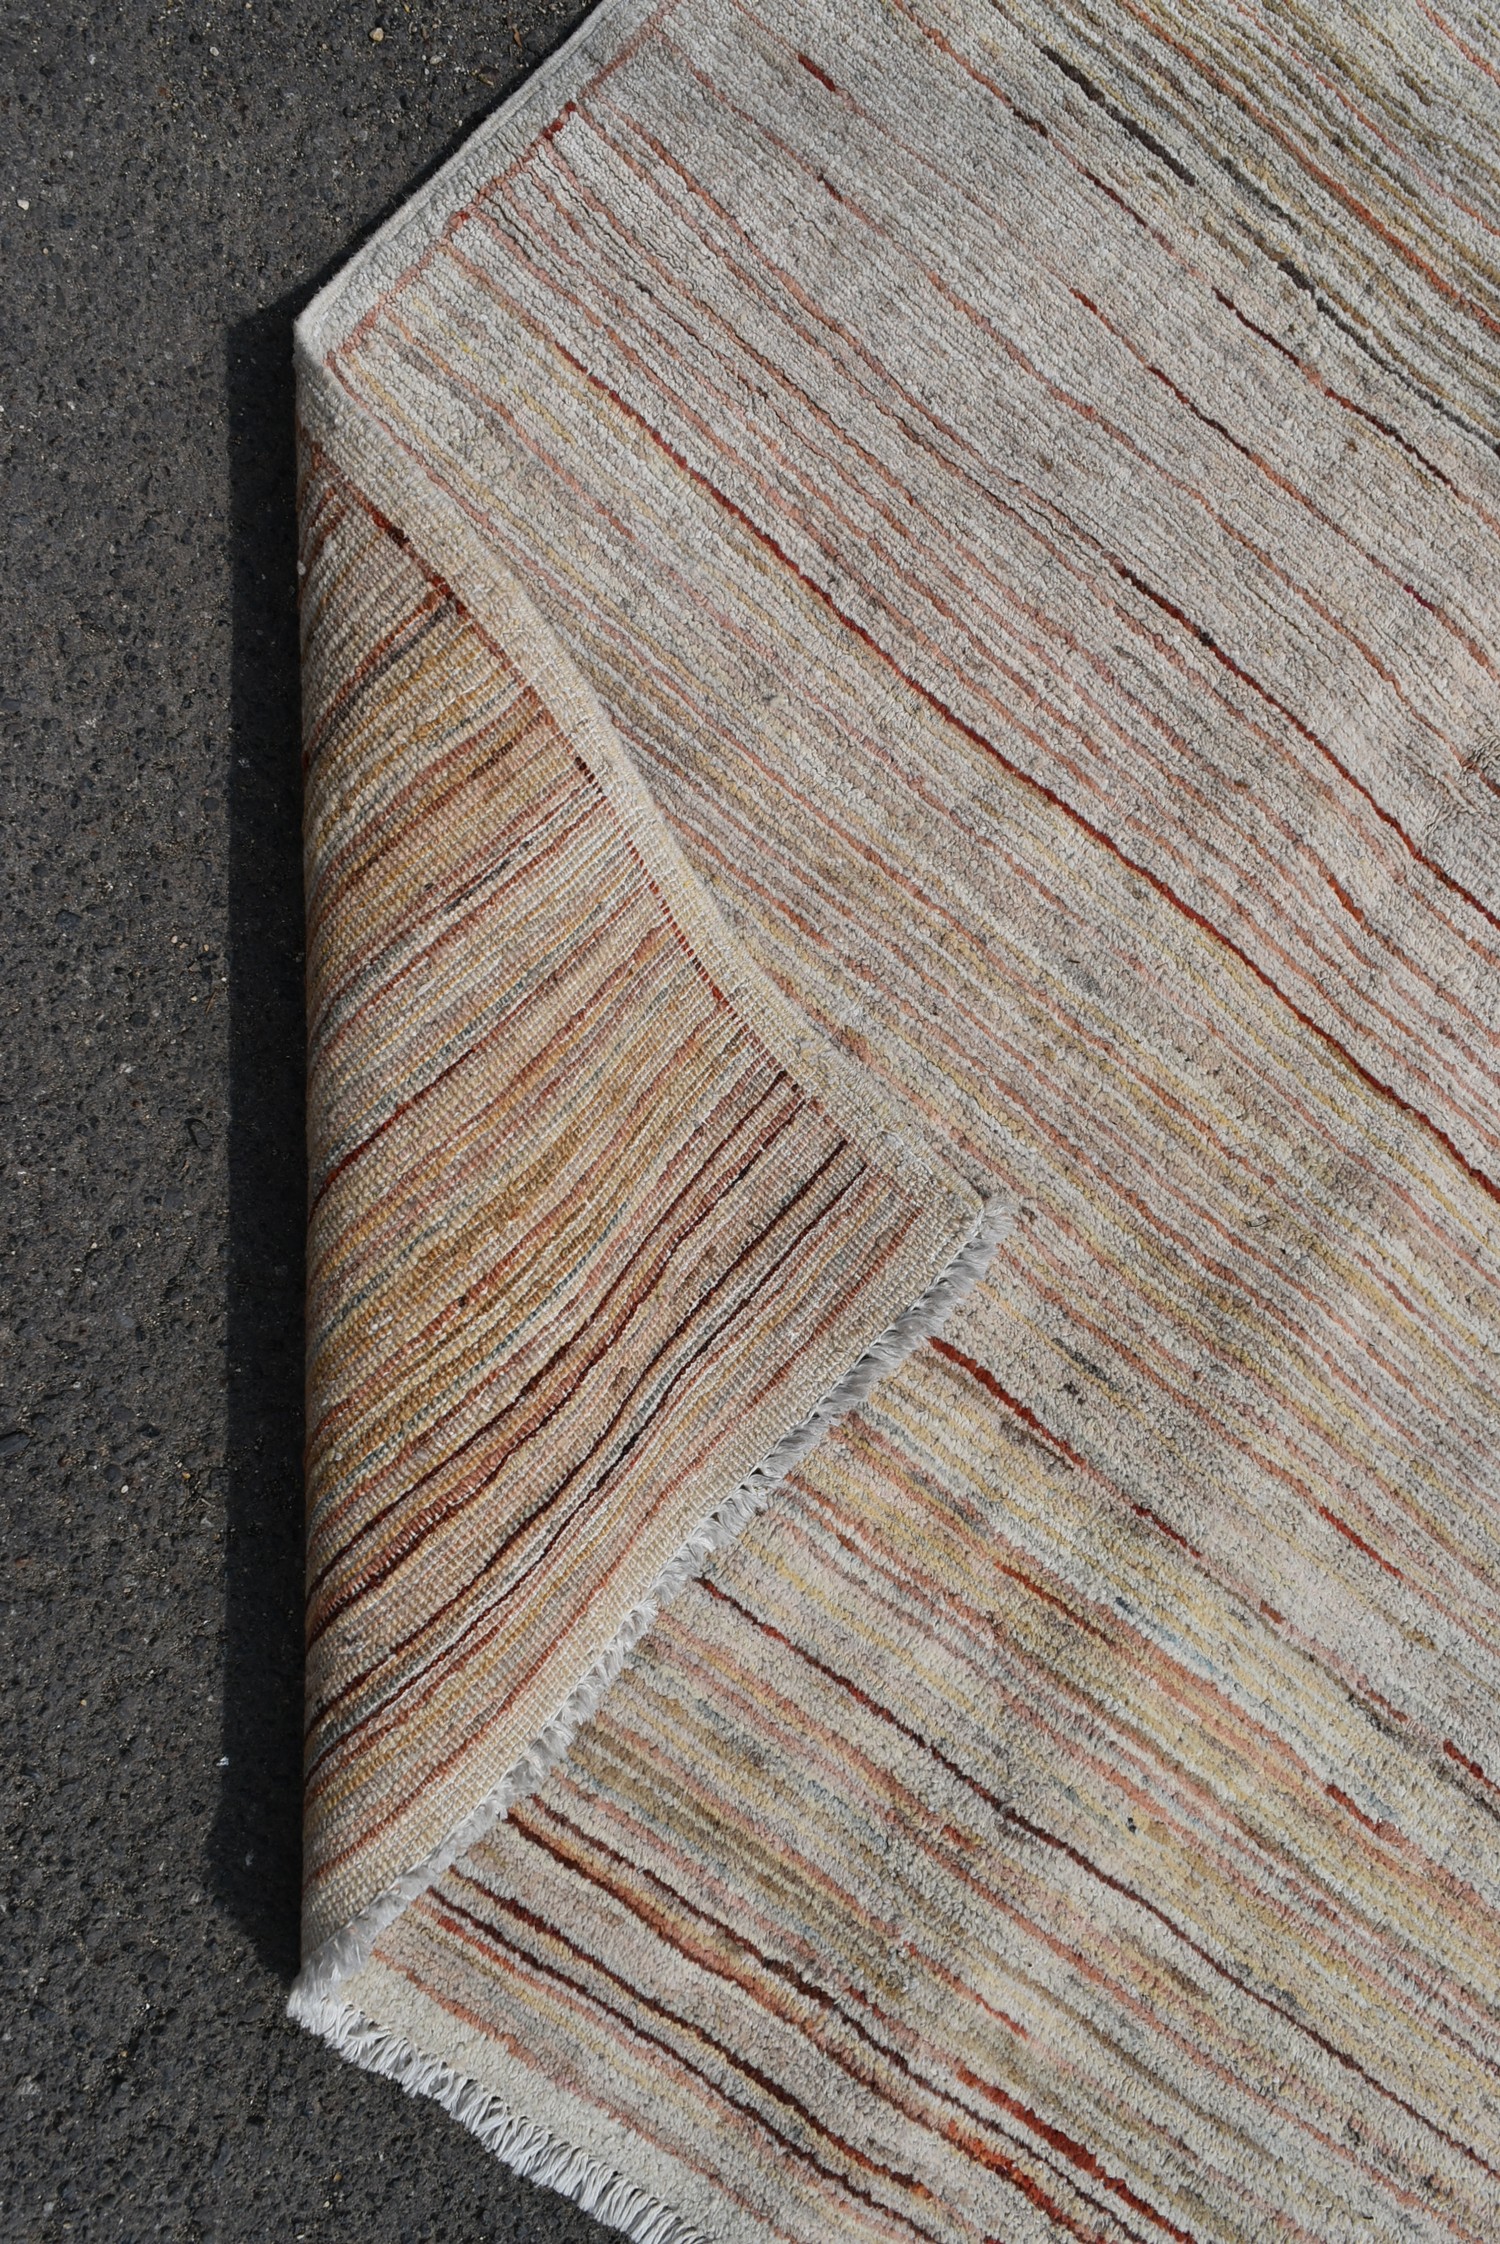 A modern rug with cross weave in hues of red and beige L.140 W.100cm - Image 3 of 3